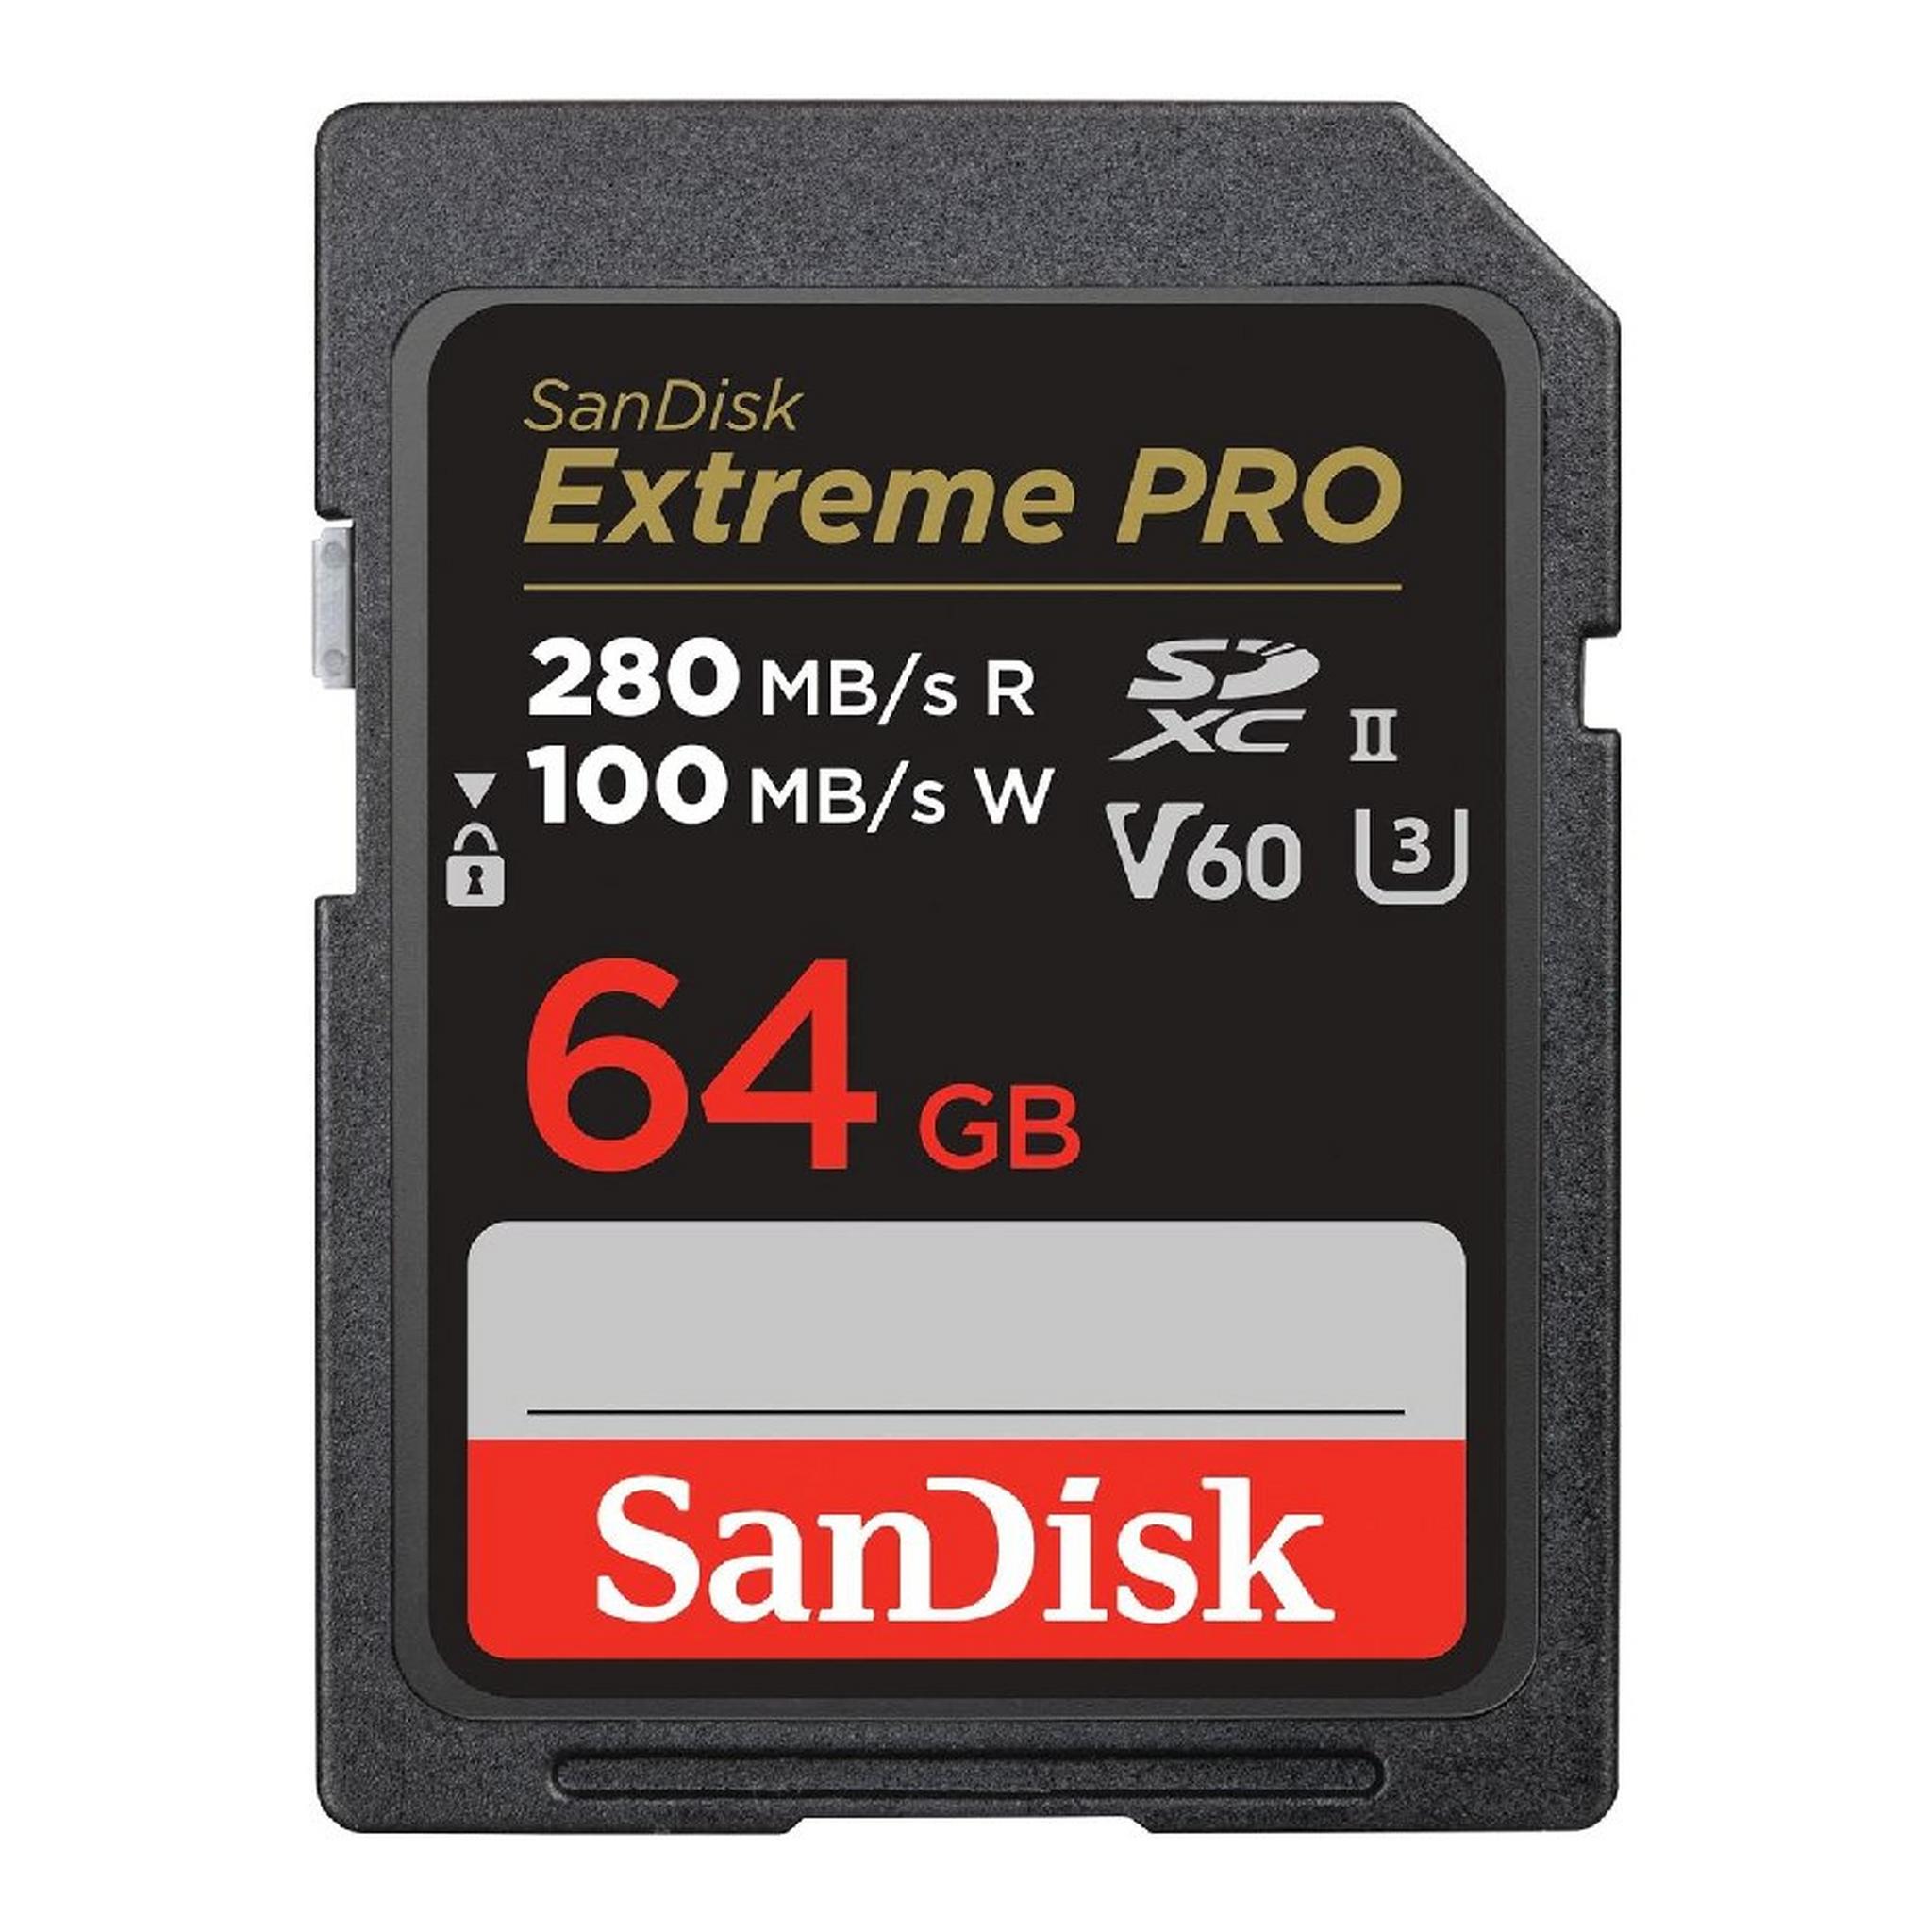 SanDisk Extreme PRO SD UHS-I Memory Card, 64GB - SDSDXEP-064G-GN4IN